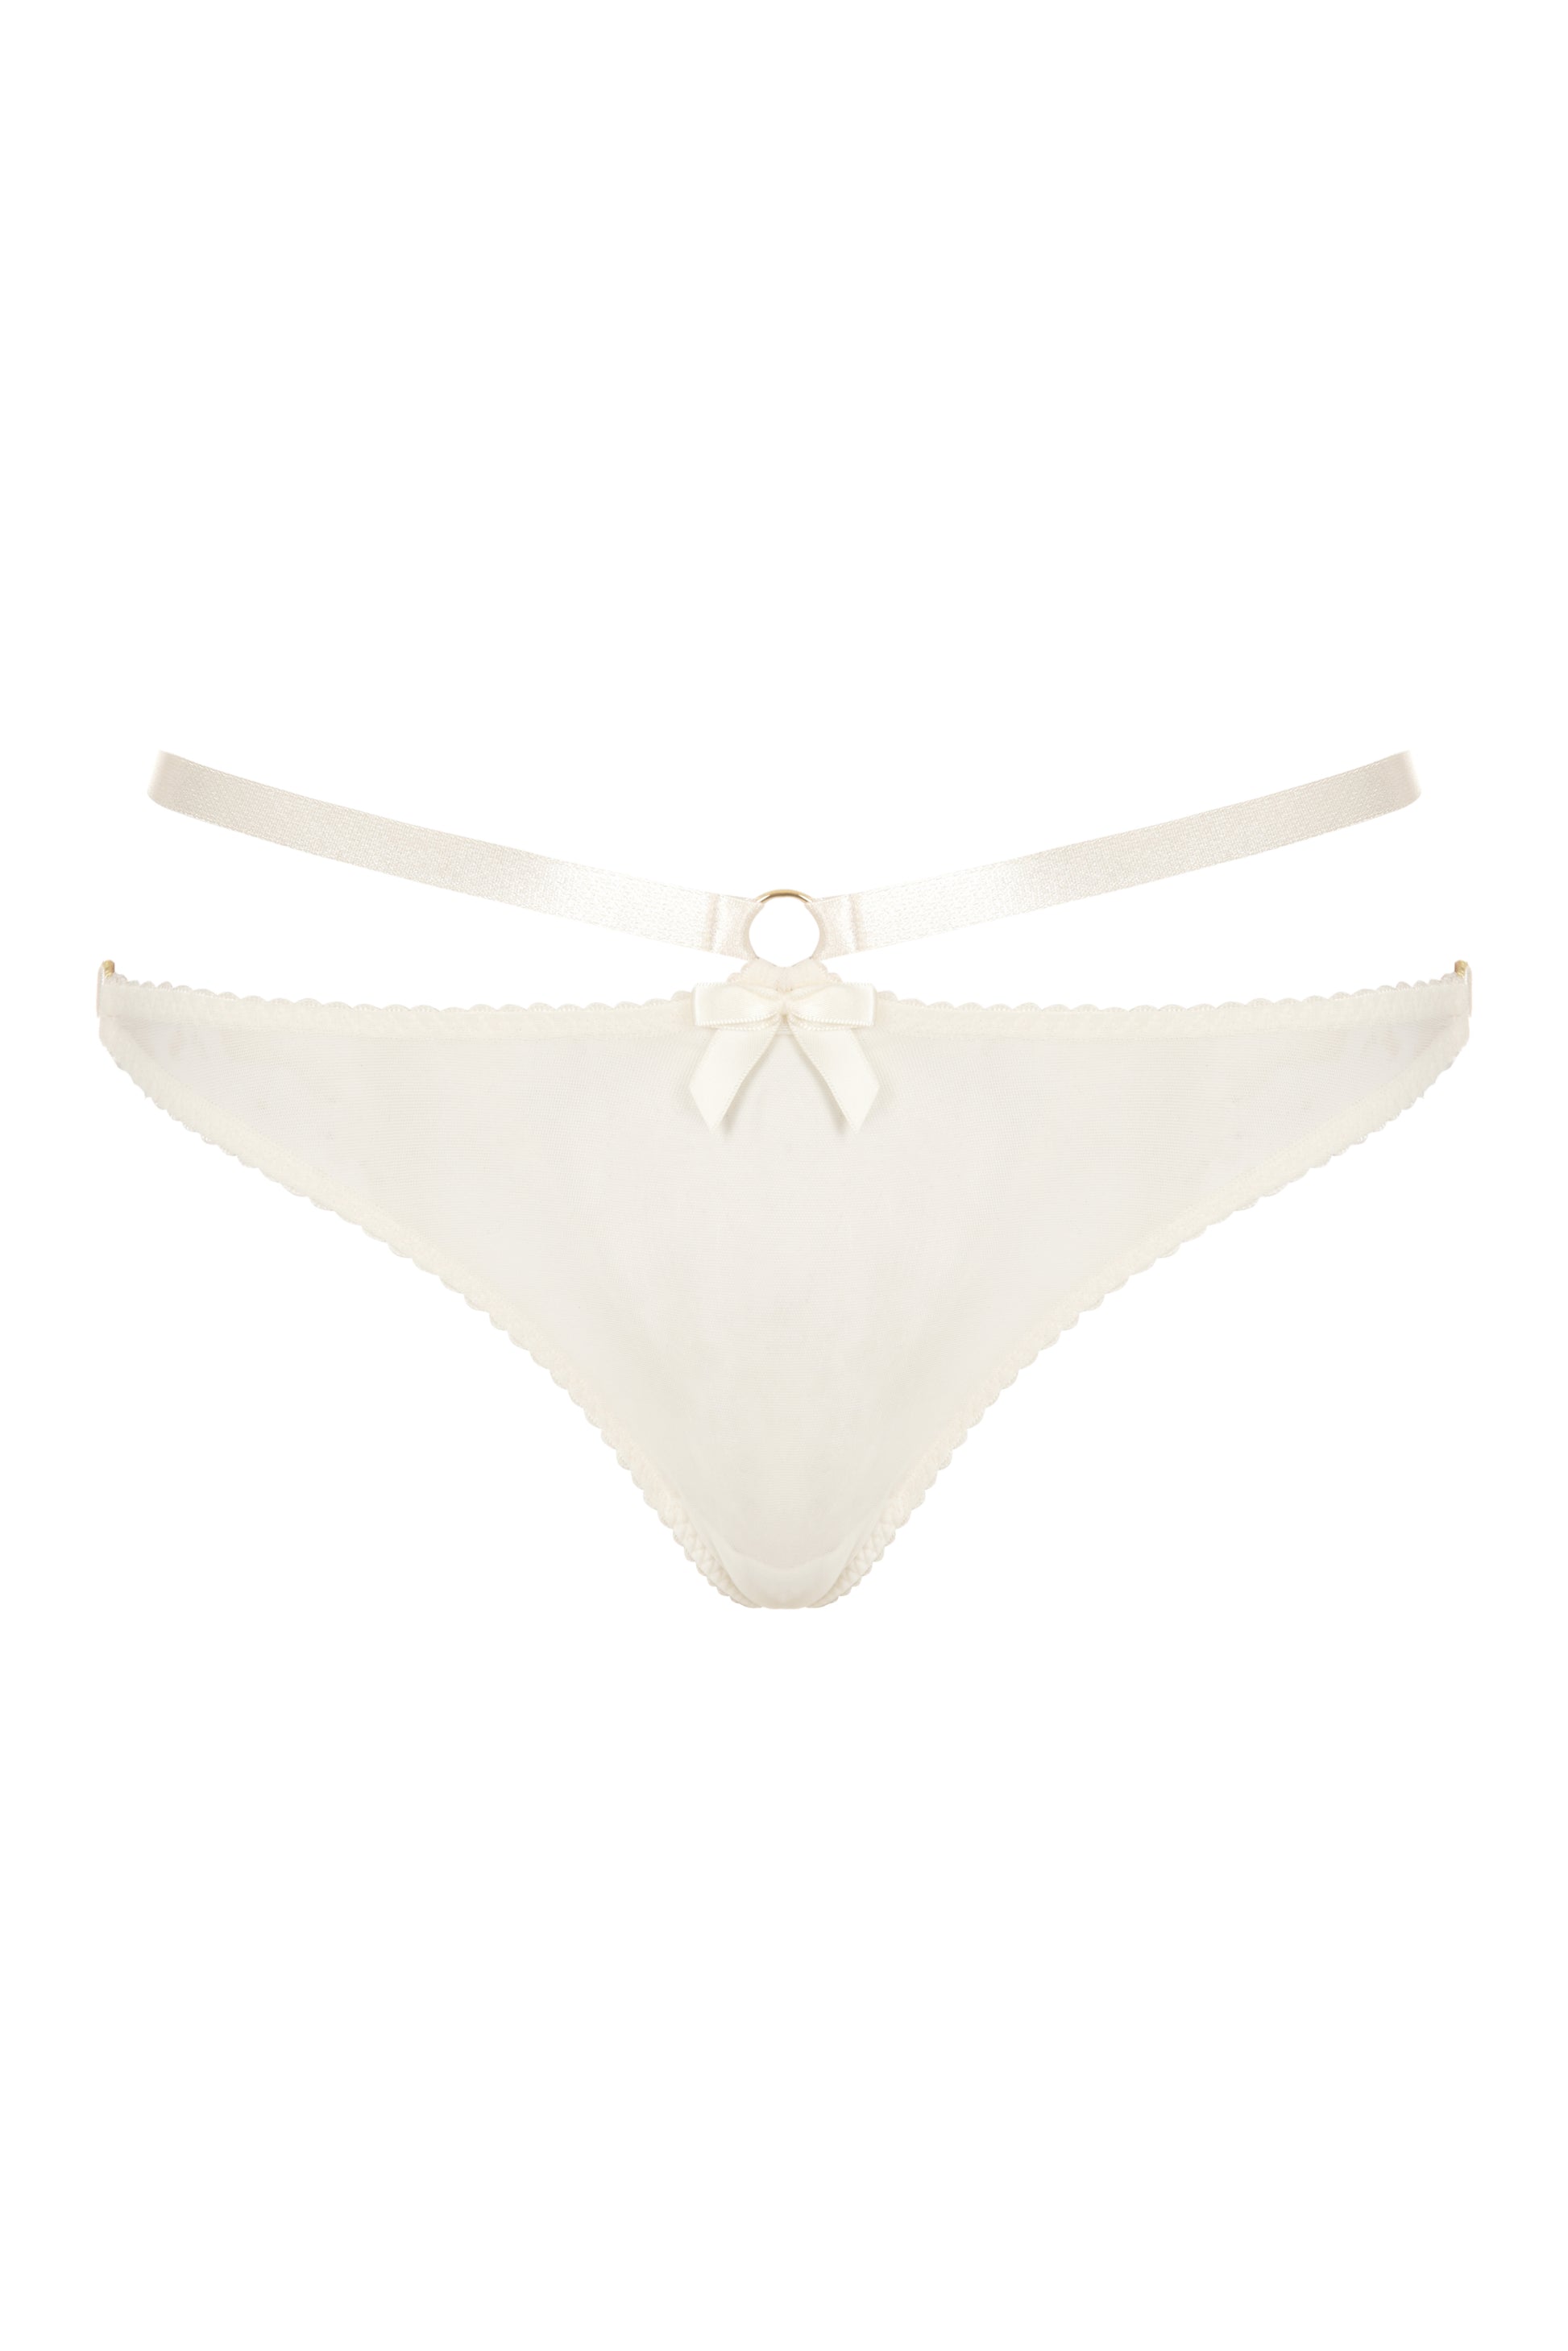 Bordelle Harness Thong freeshipping - TrousseauOfDallas